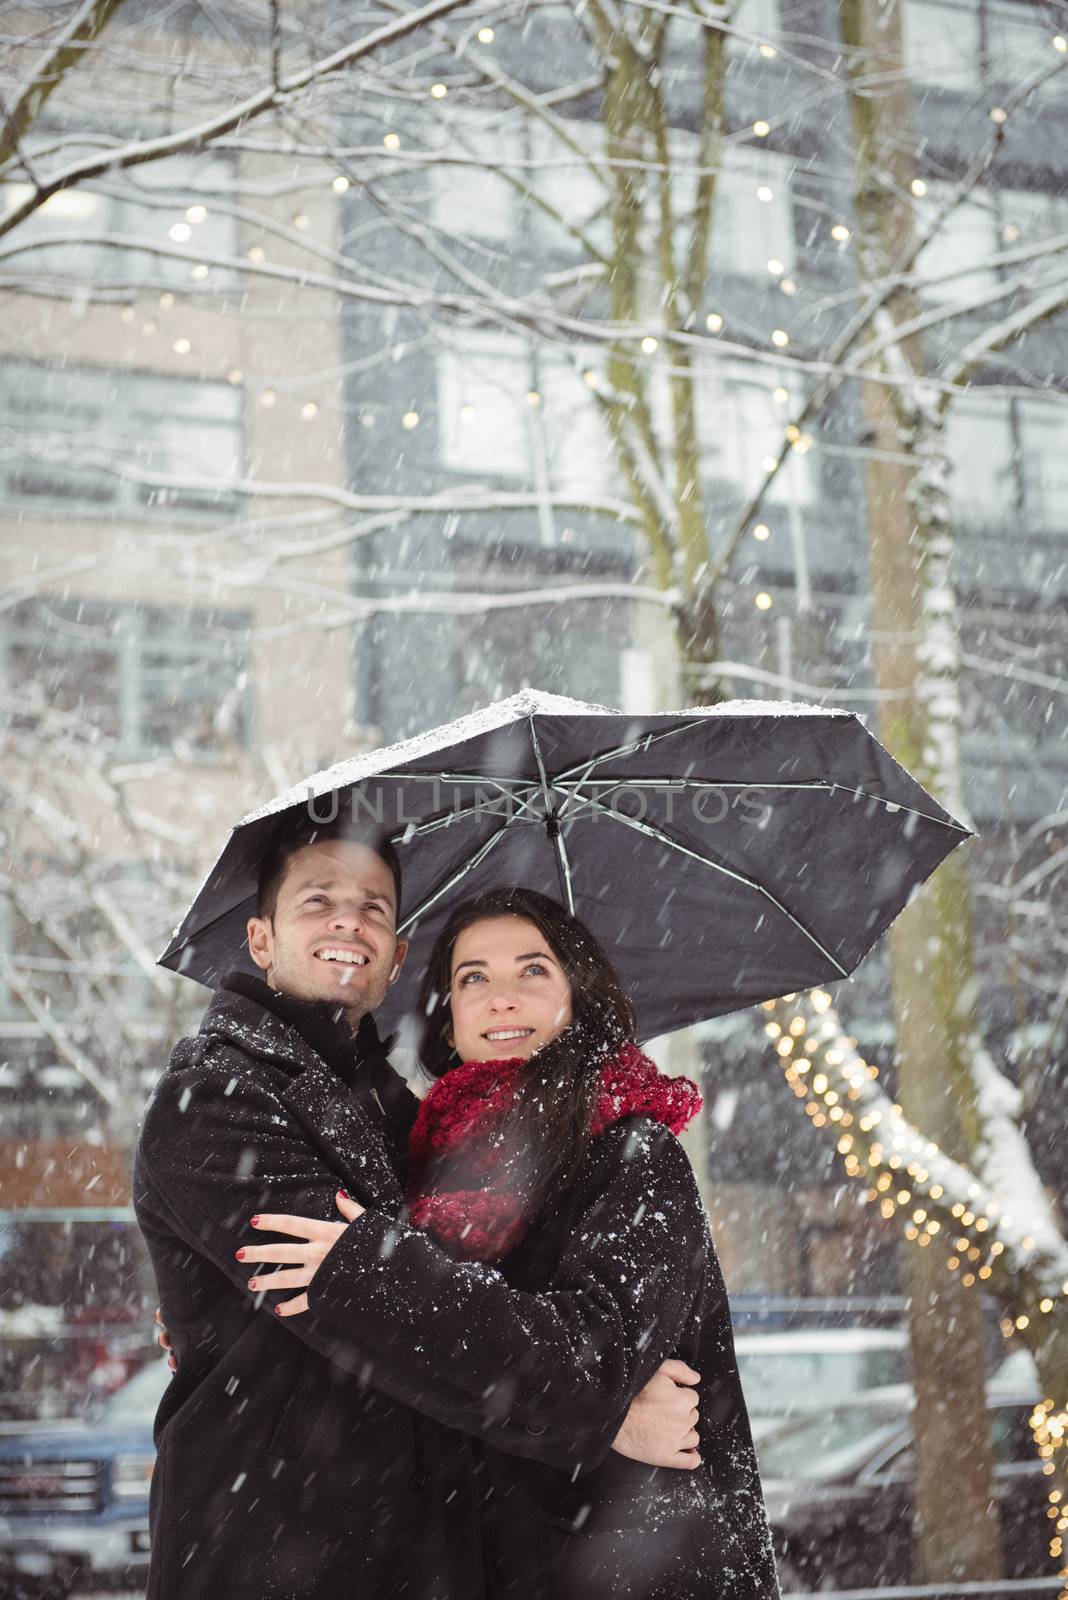 Couple embracing in street during snowfall by Wavebreakmedia